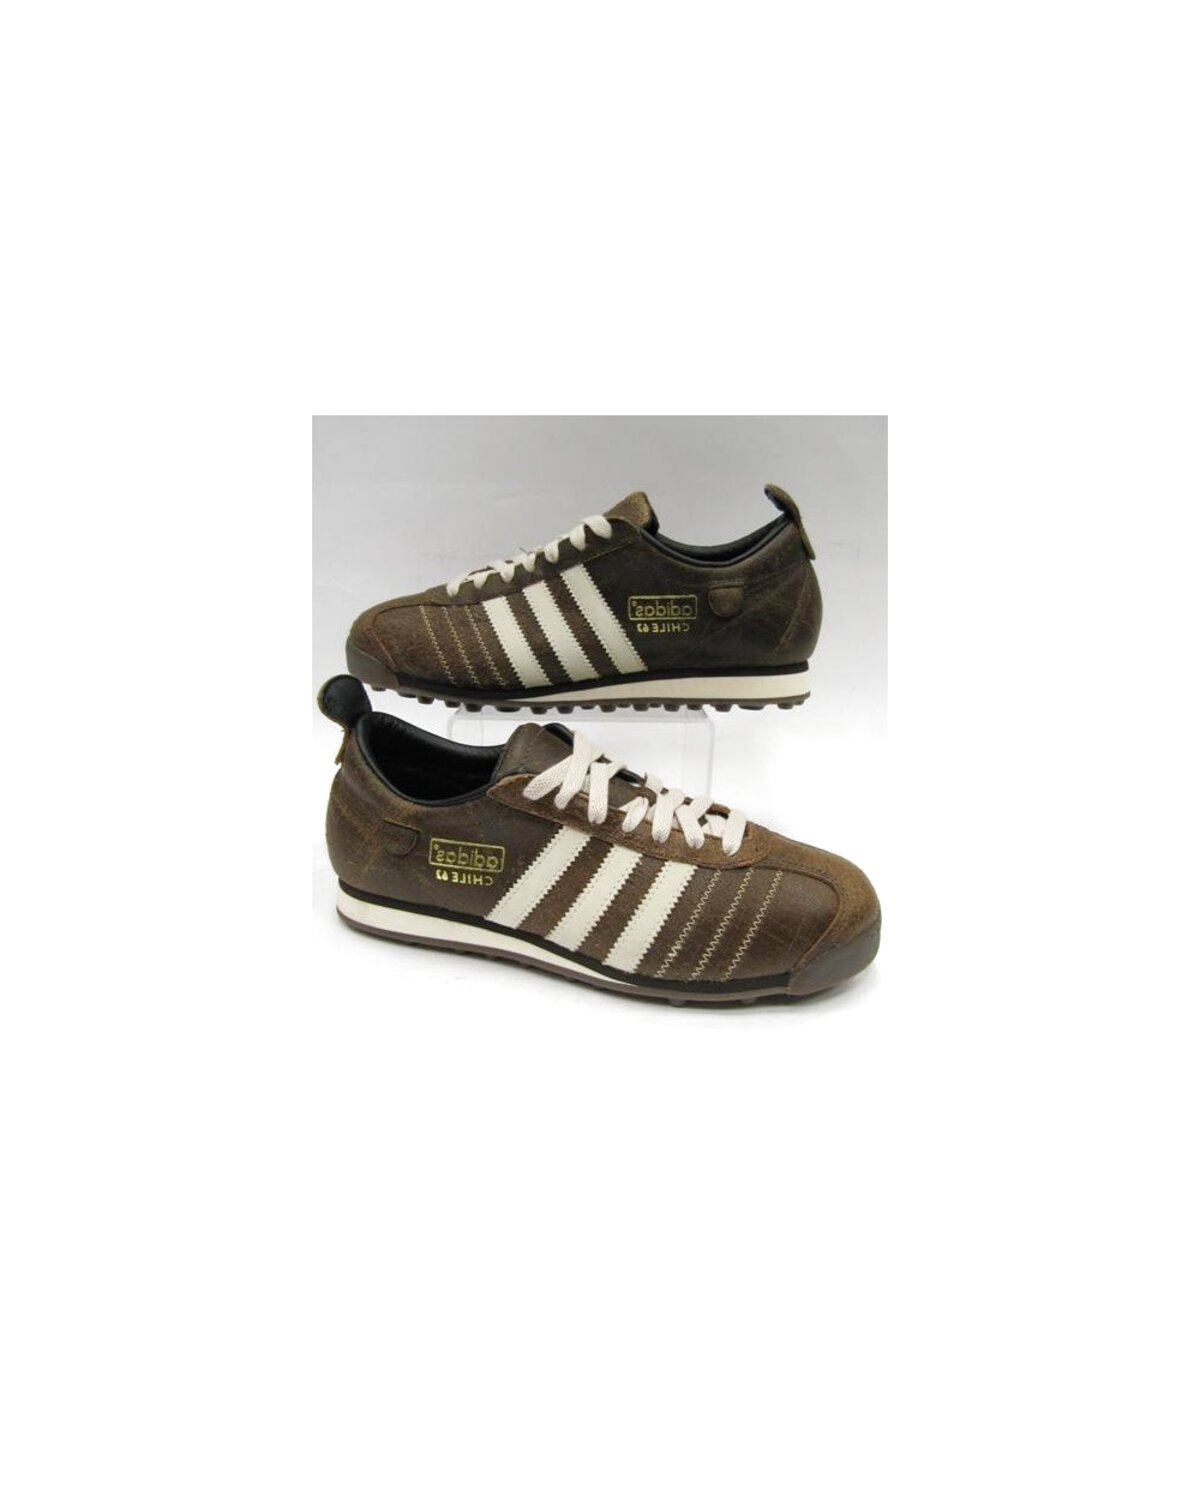 Adidas Chile Trainers for sale in UK | 51 used Adidas Chile Trainers